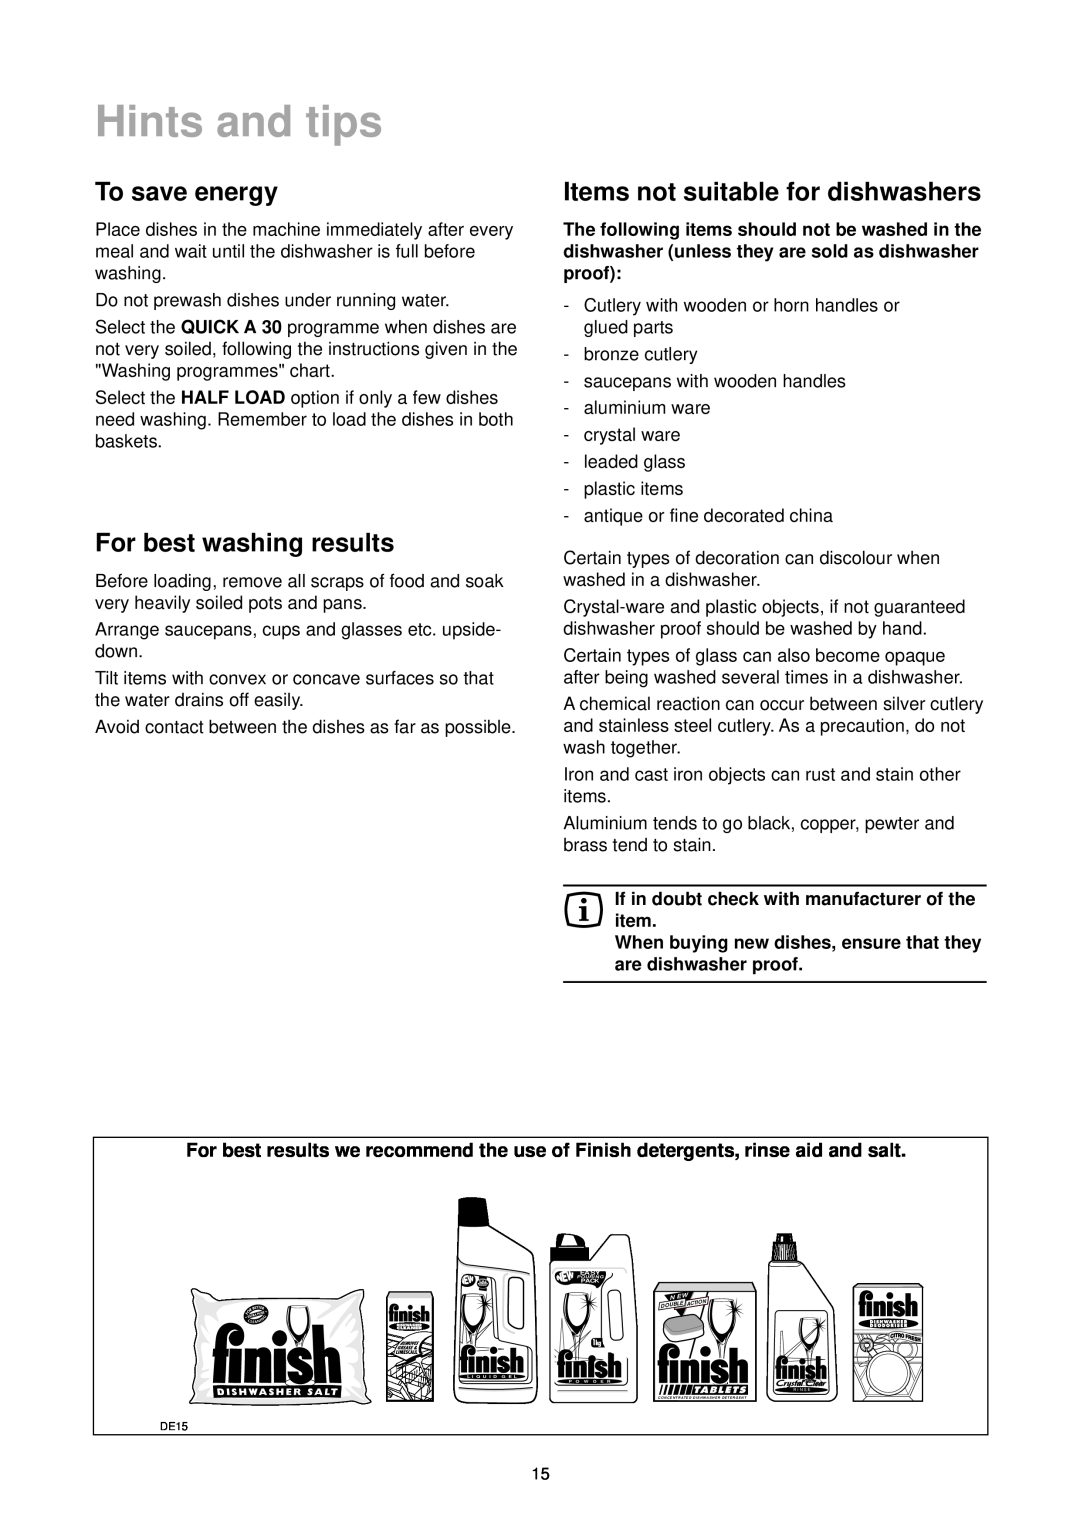 Zanussi DE 6844 A Hints and tips, To save energy, For best washing results, Items not suitable for dishwashers, Half Load 